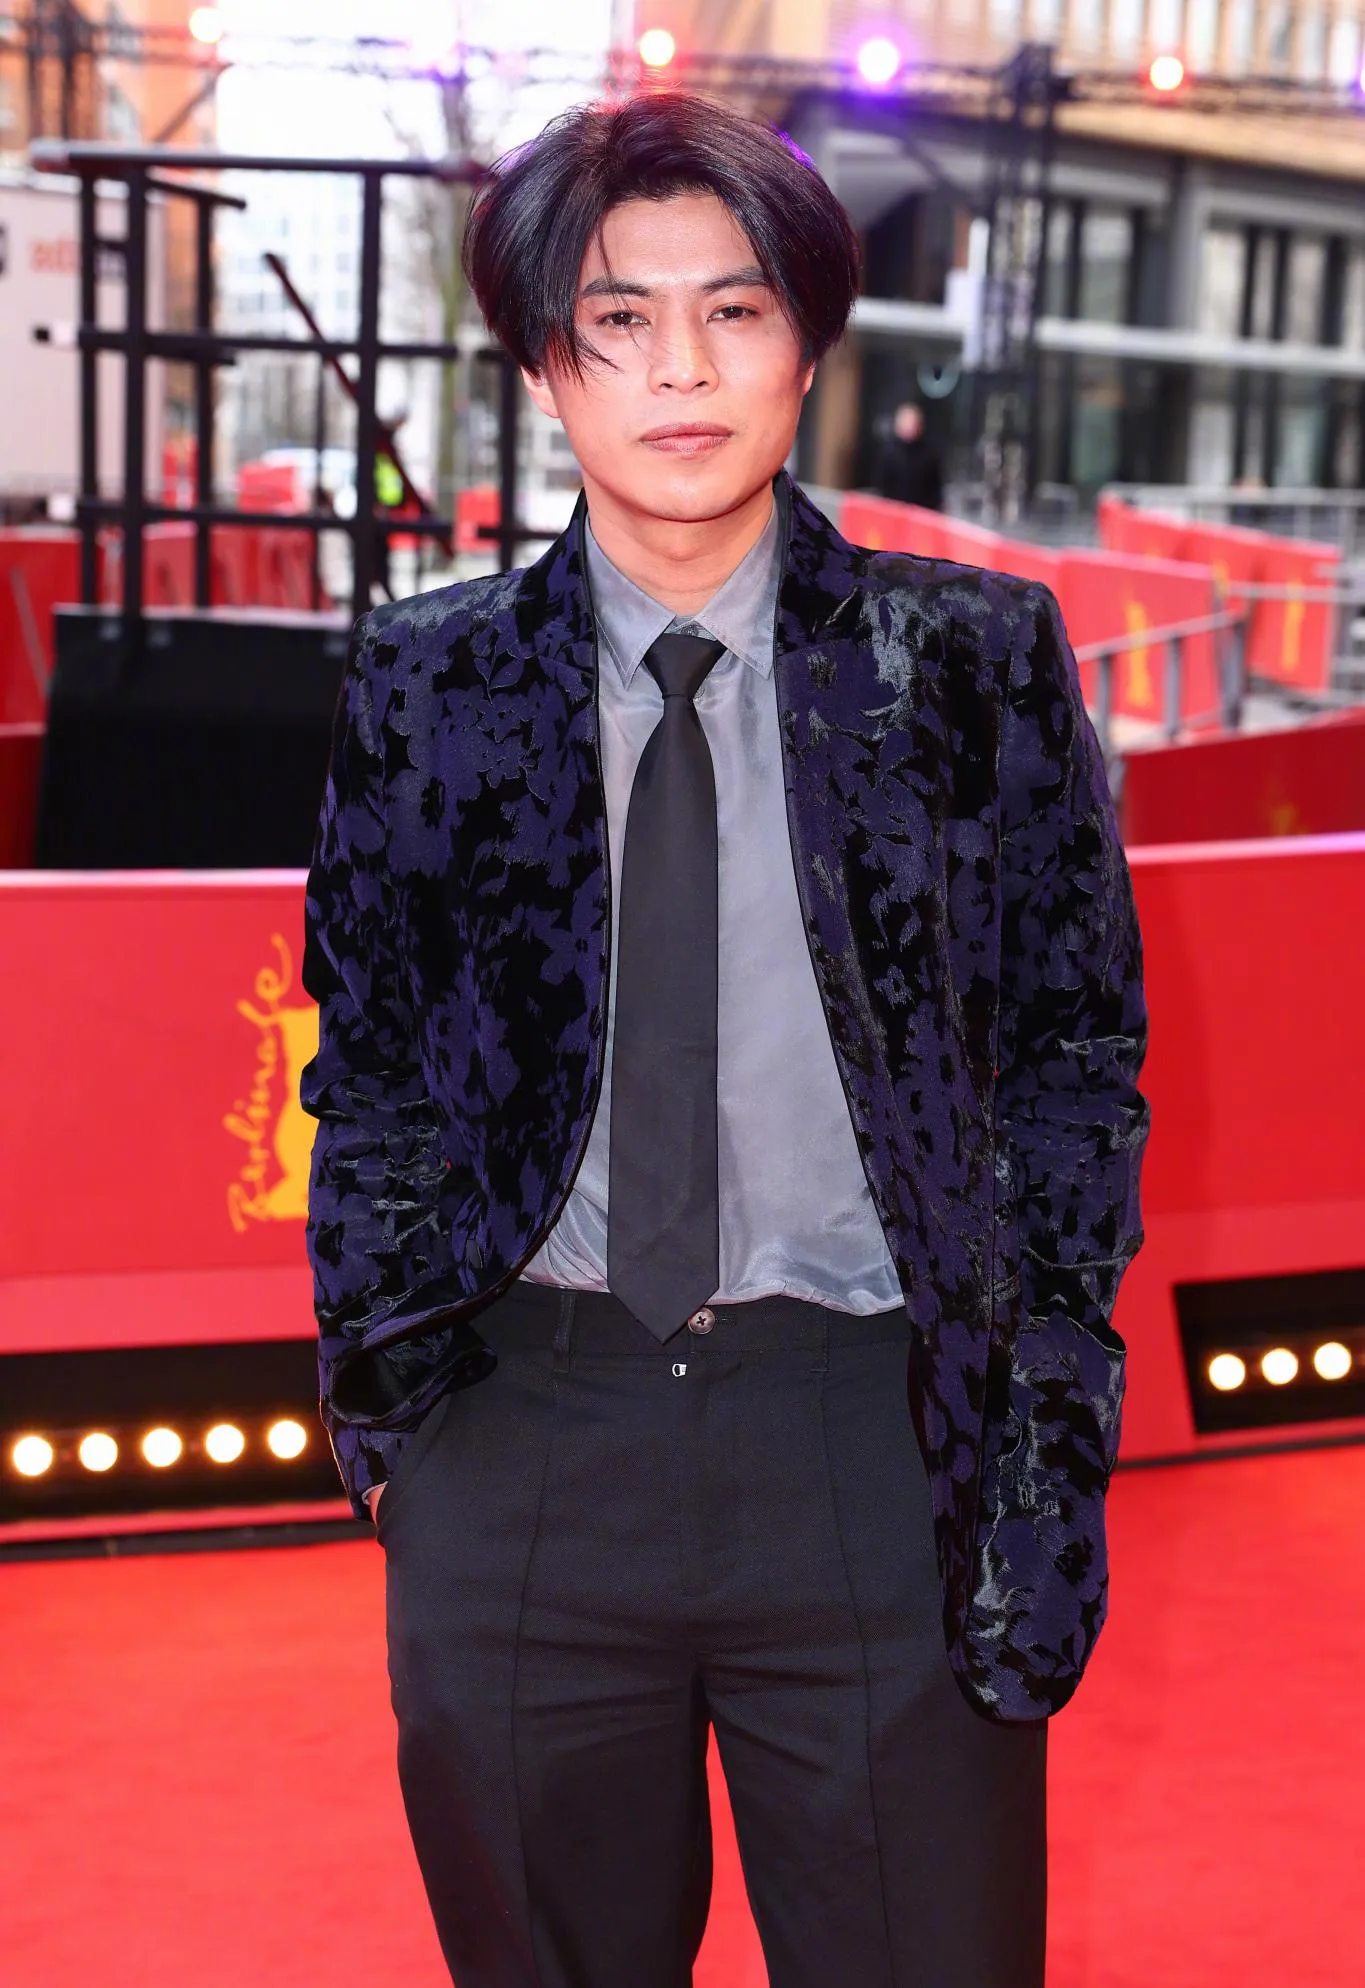 'Xue yun' crew attended the red carpet premiere of the film at the Berlin International Film Festival | FMV6